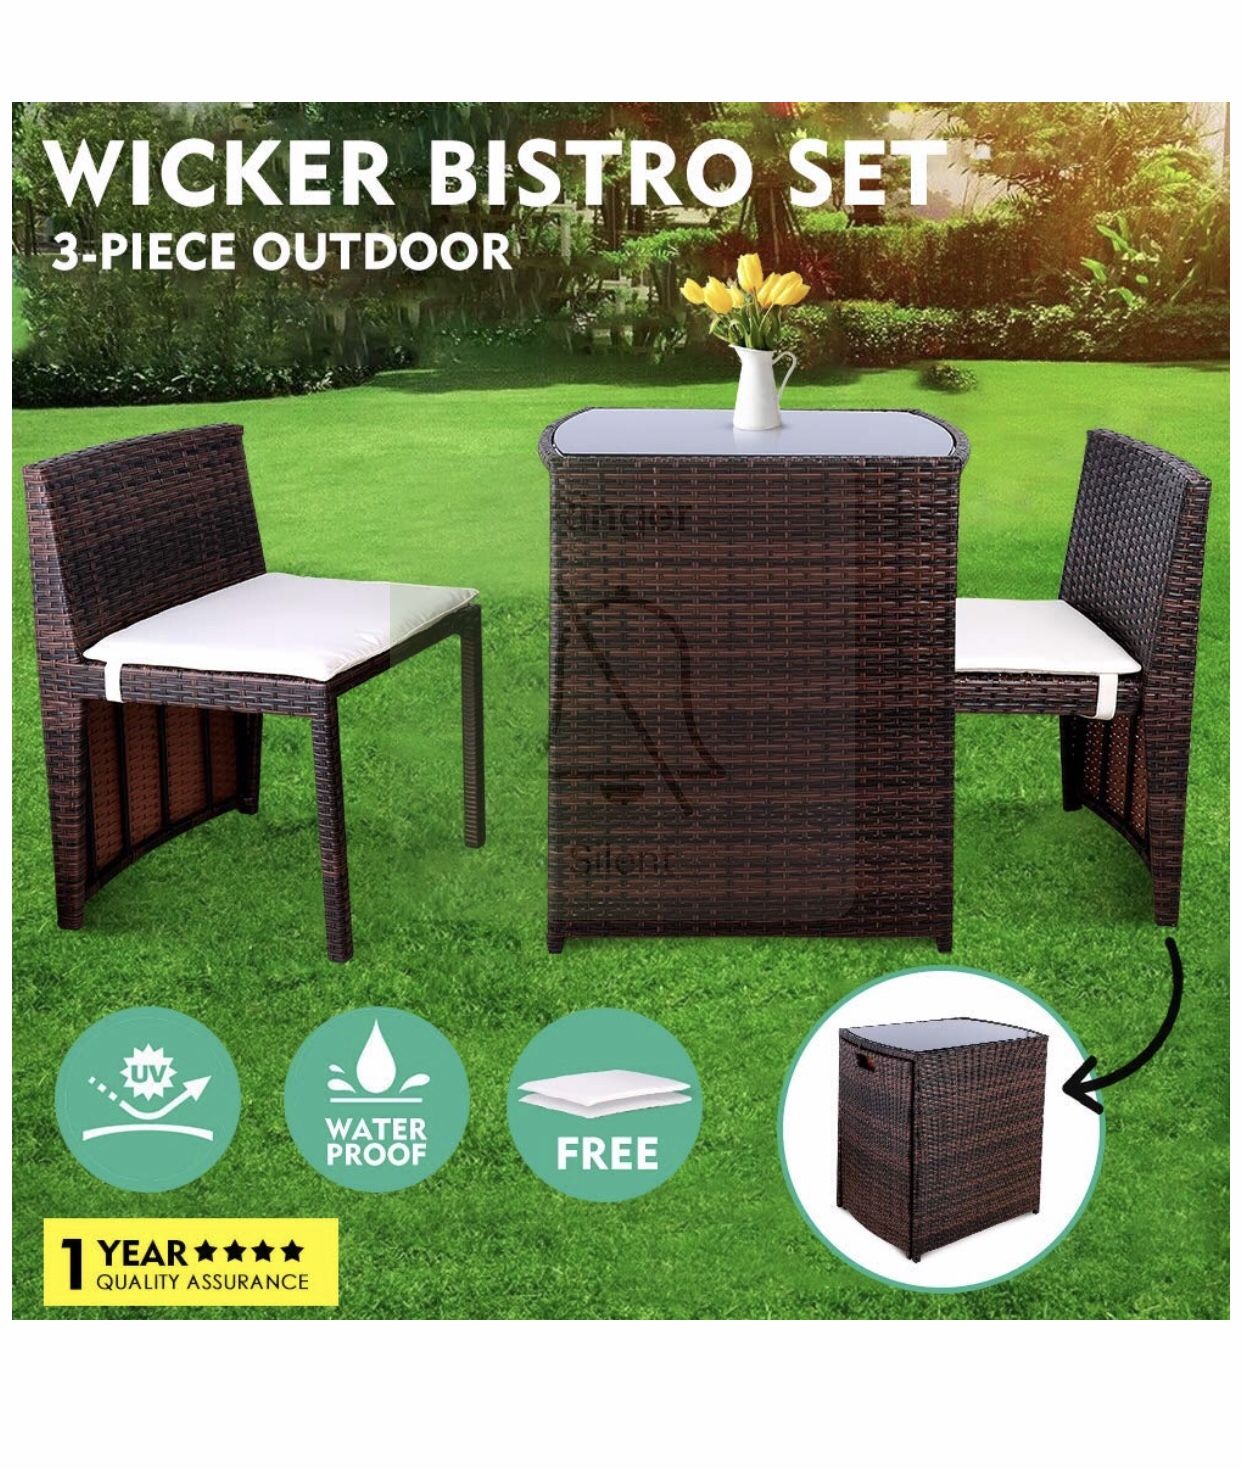 GARTIO 3PCS Wicker Bistro Set, Outdoor Garden Lawn Sofa Furniture, with Glass Top Table and 2 Cushioned Chairs with Waterproof Mat, Space Saving Desi